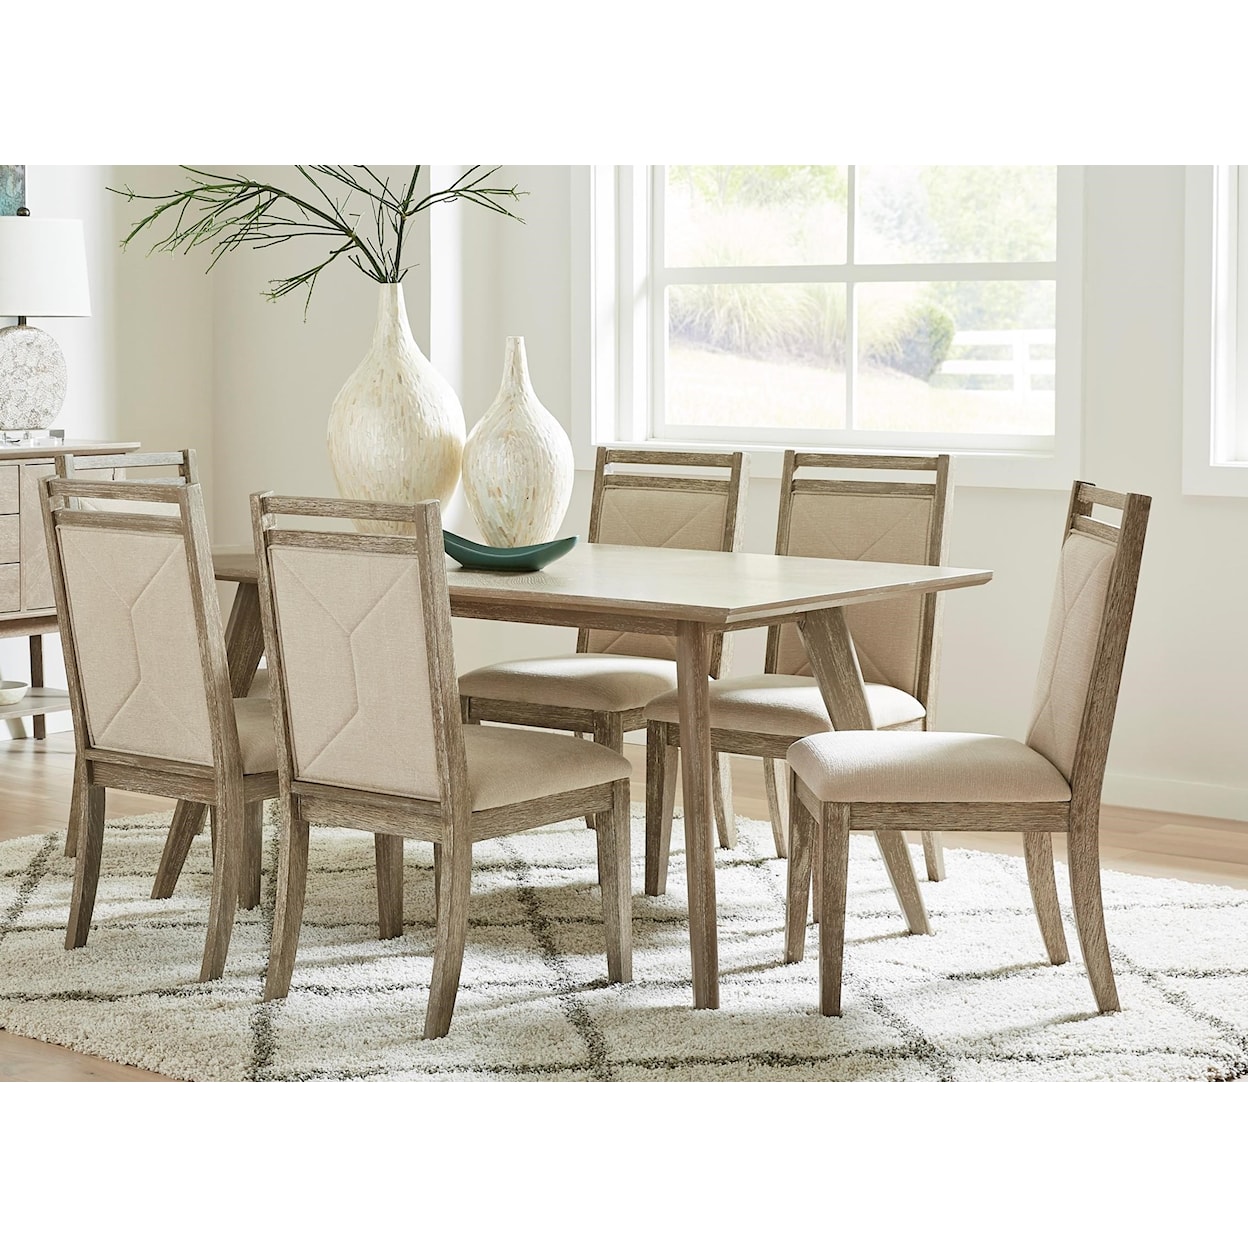 Progressive Furniture Beck 7-Piece Table and Chair Set